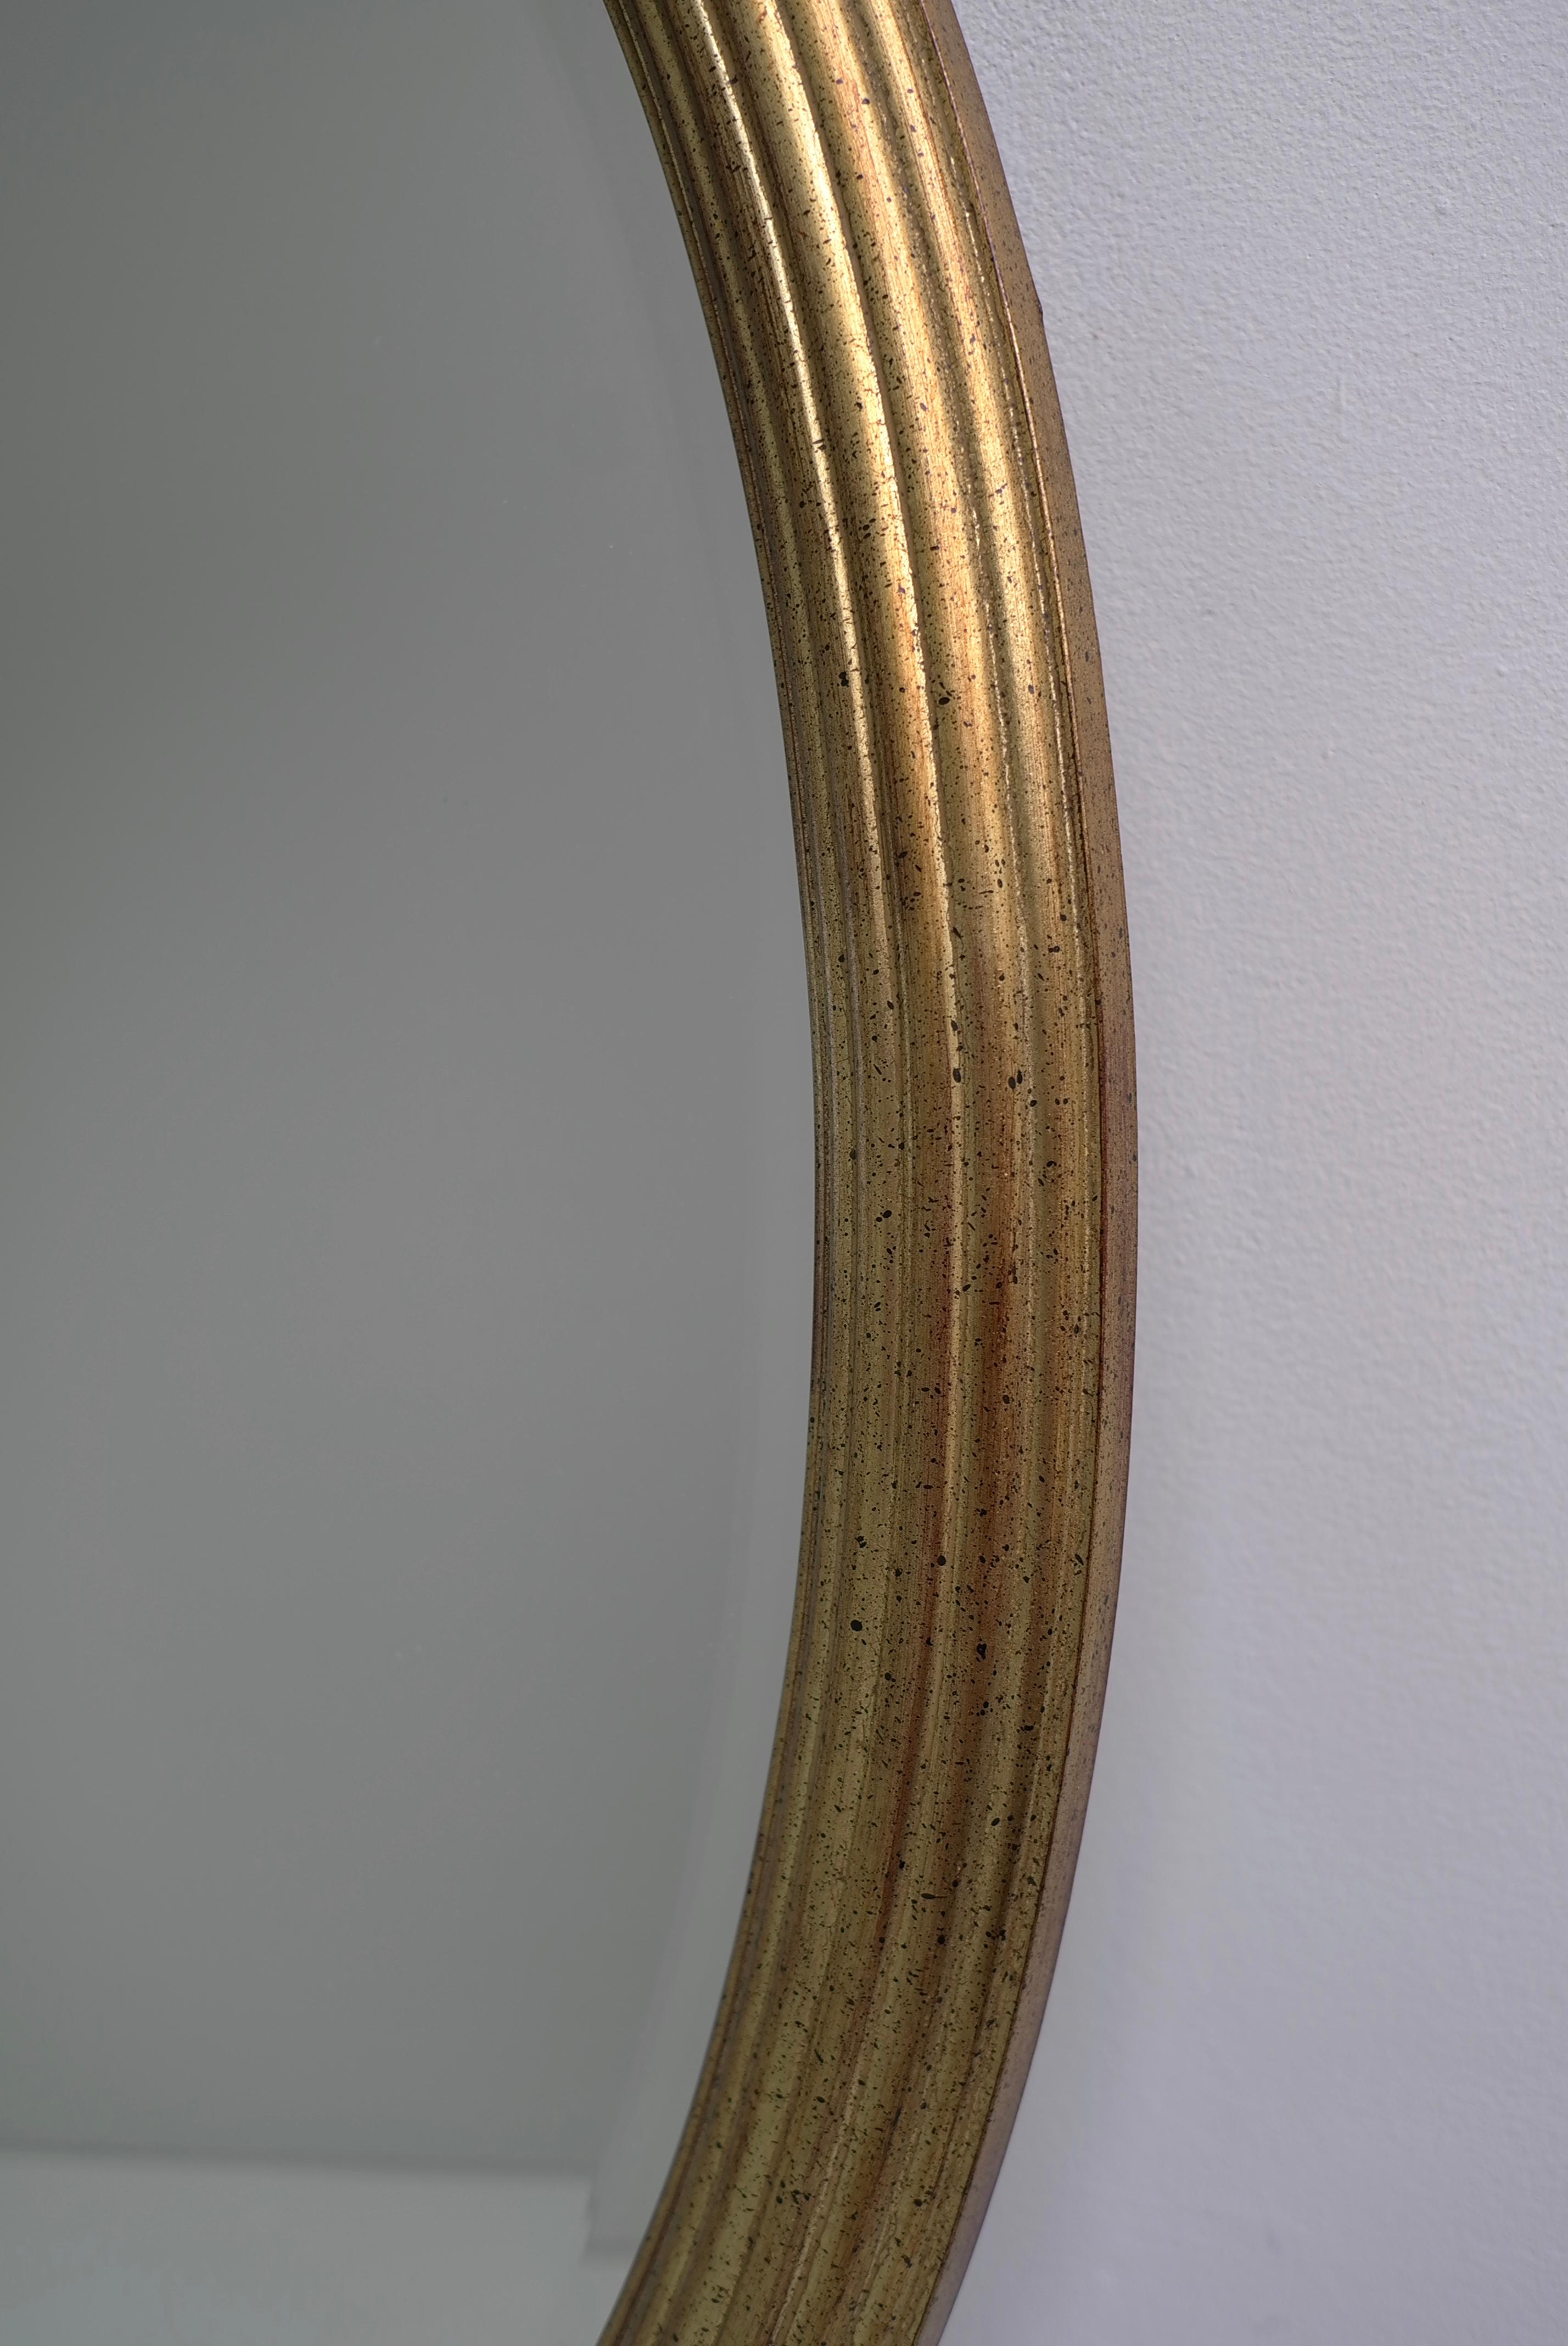 European Classic French Oval Mirror in Gold Color, 1960s